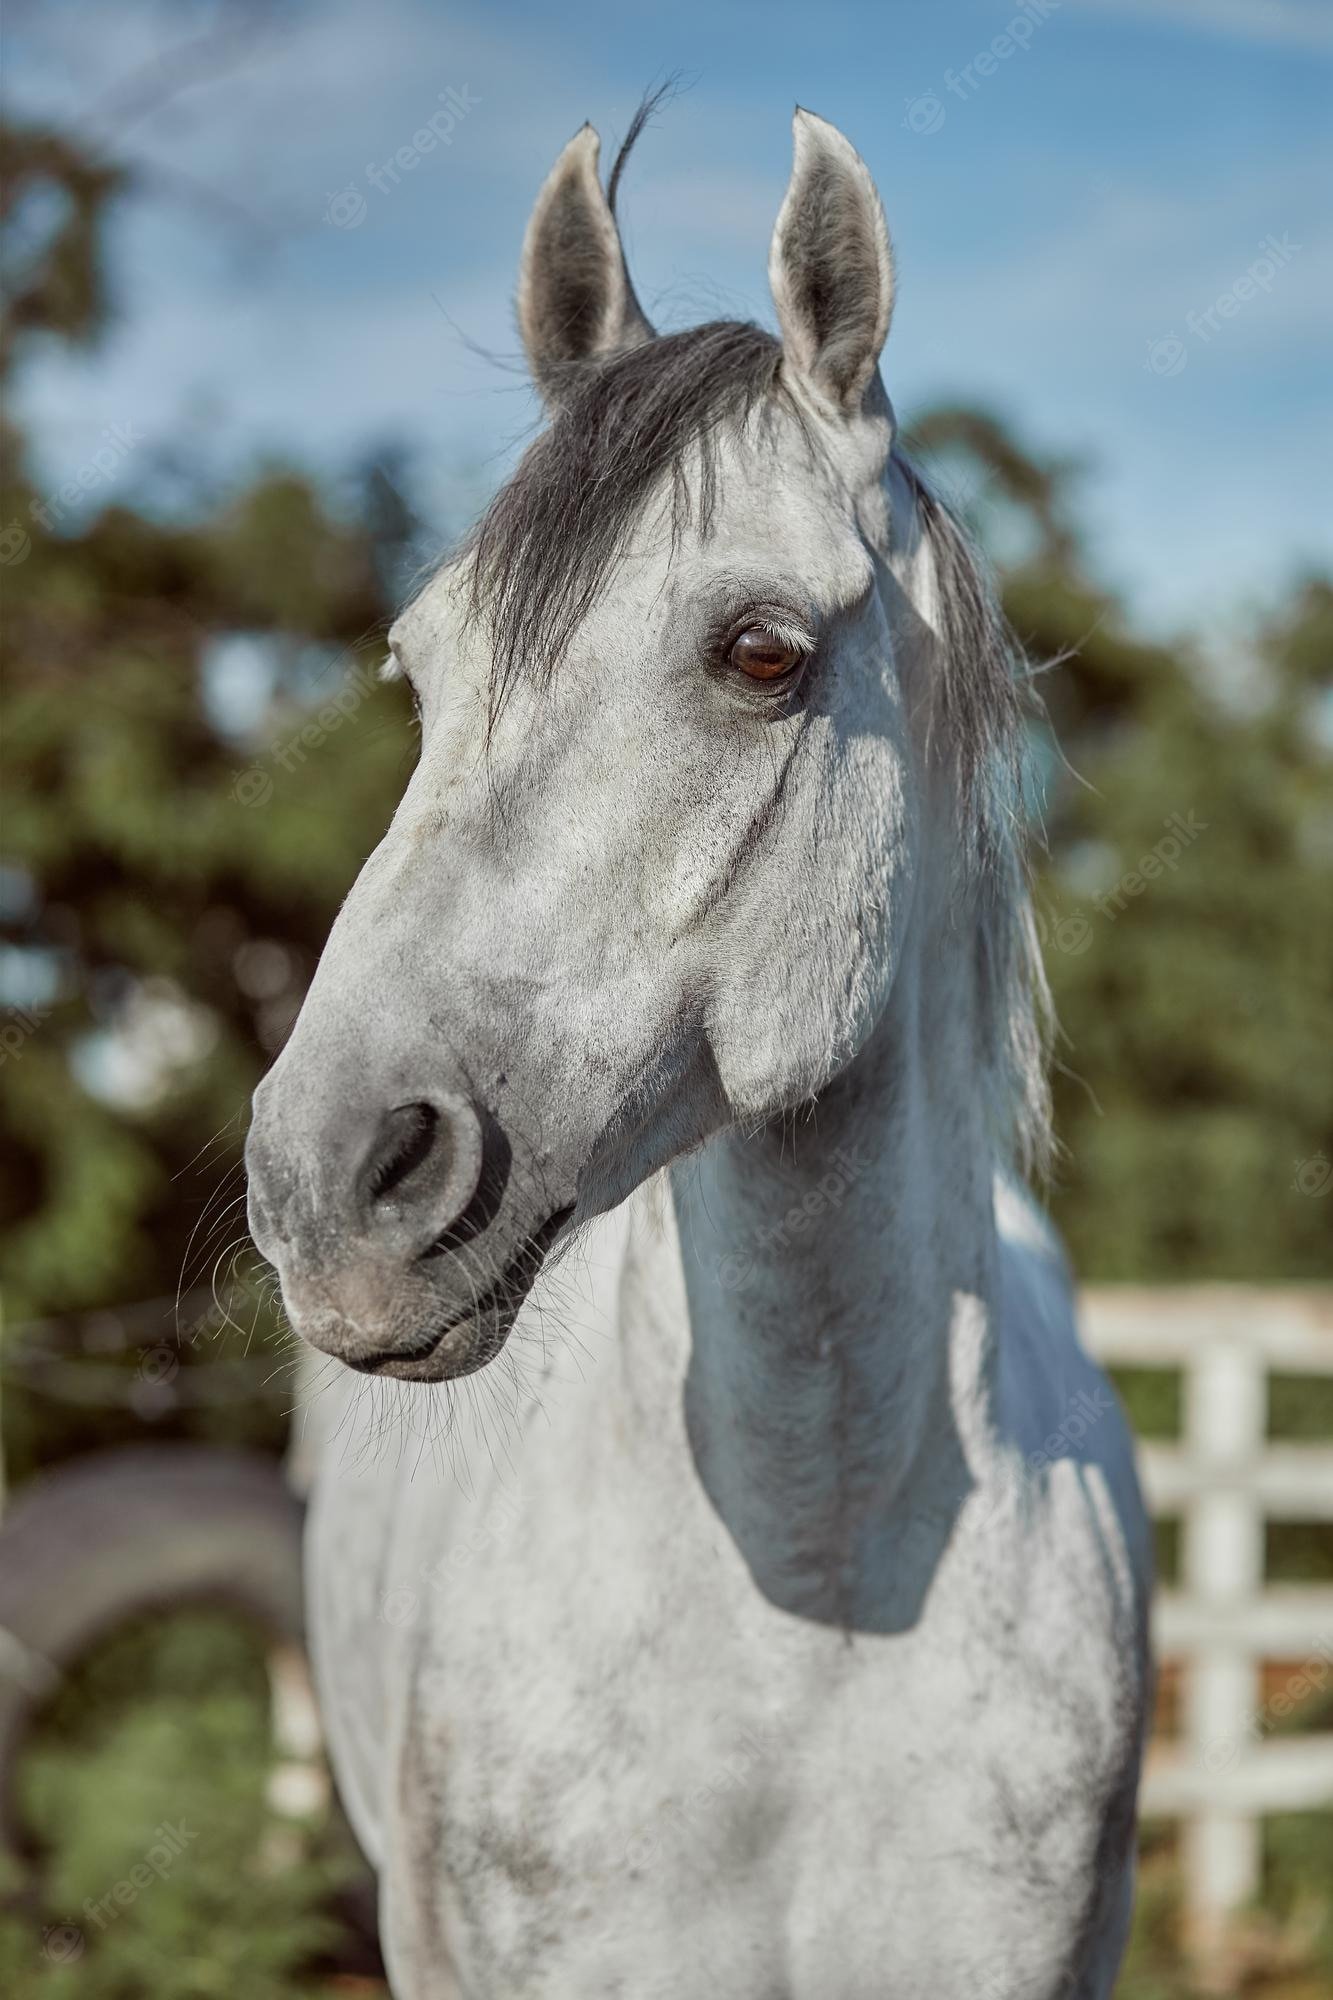 Premium Photo. Beautiful Grey Horse In White Apple, Close Up Of Muzzle, Cute Look, Mane, Background Of Running Field, Corral, Trees. Horses Are Wonderful Animals